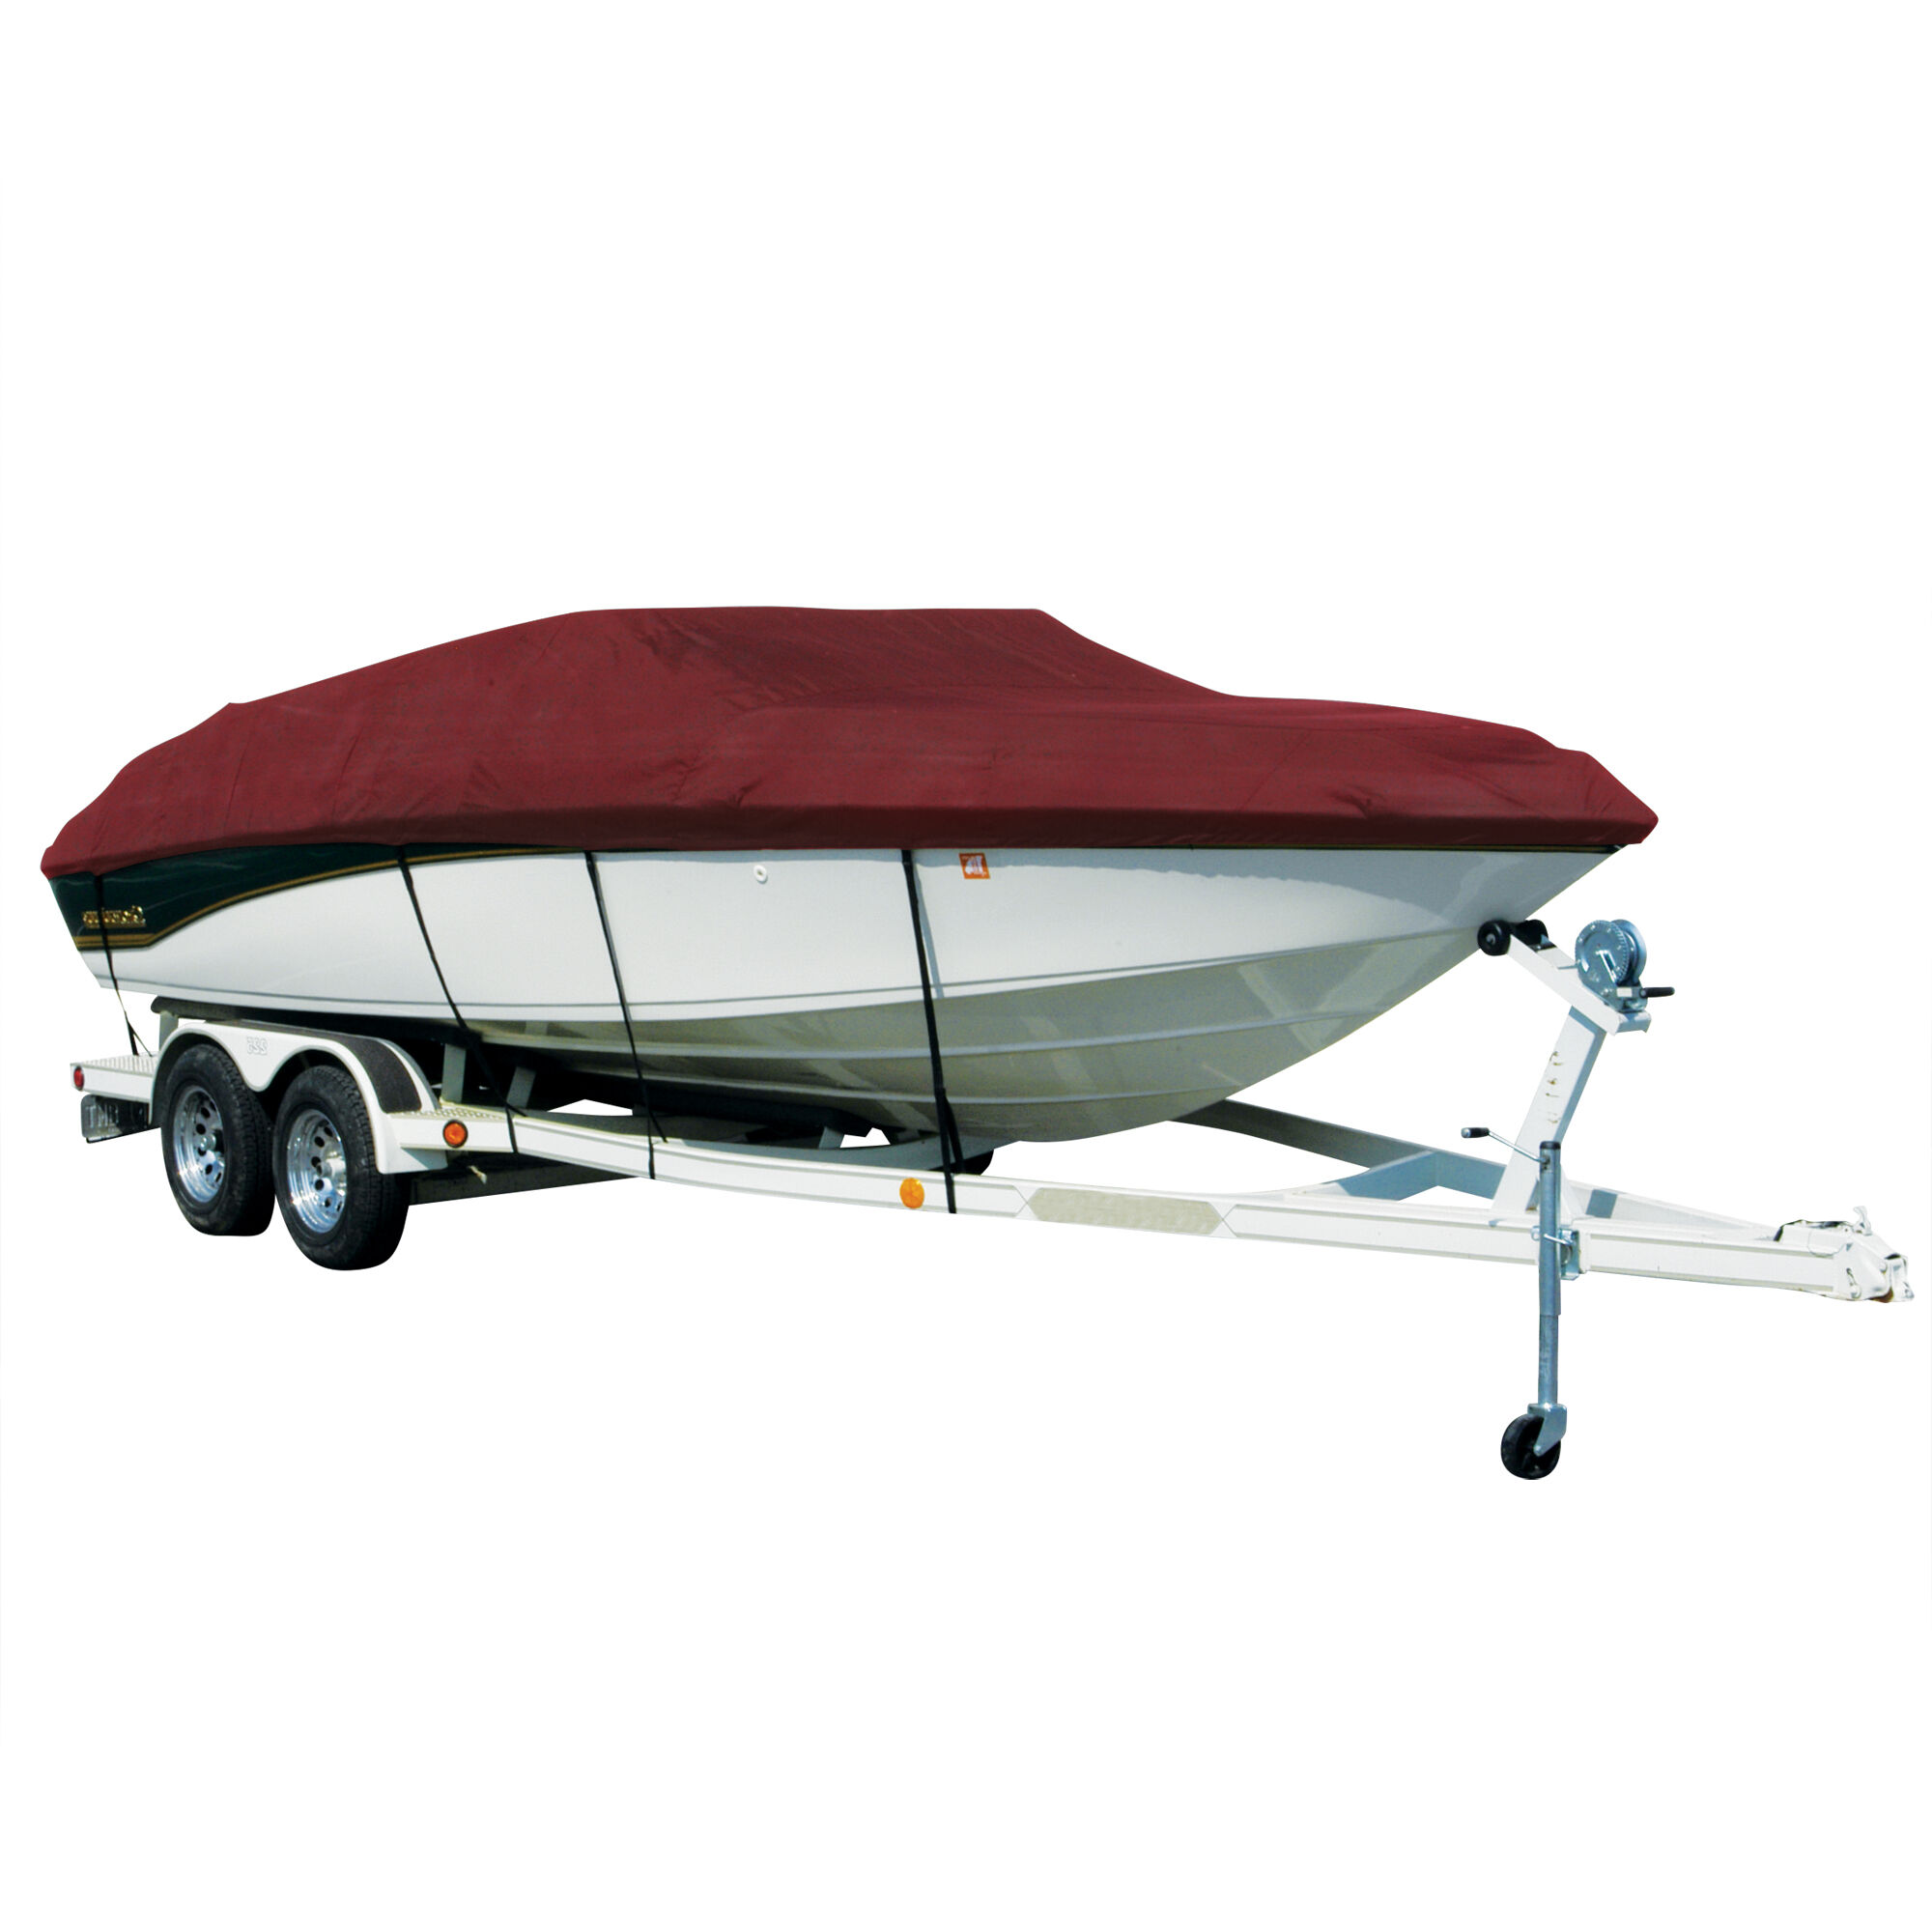 Covermate Exact Fit Sharkskin Boat Cover For Tahoe 400 Ts w/ Bimin Laid Aft On Storage Strut Over Motor in Burgundy